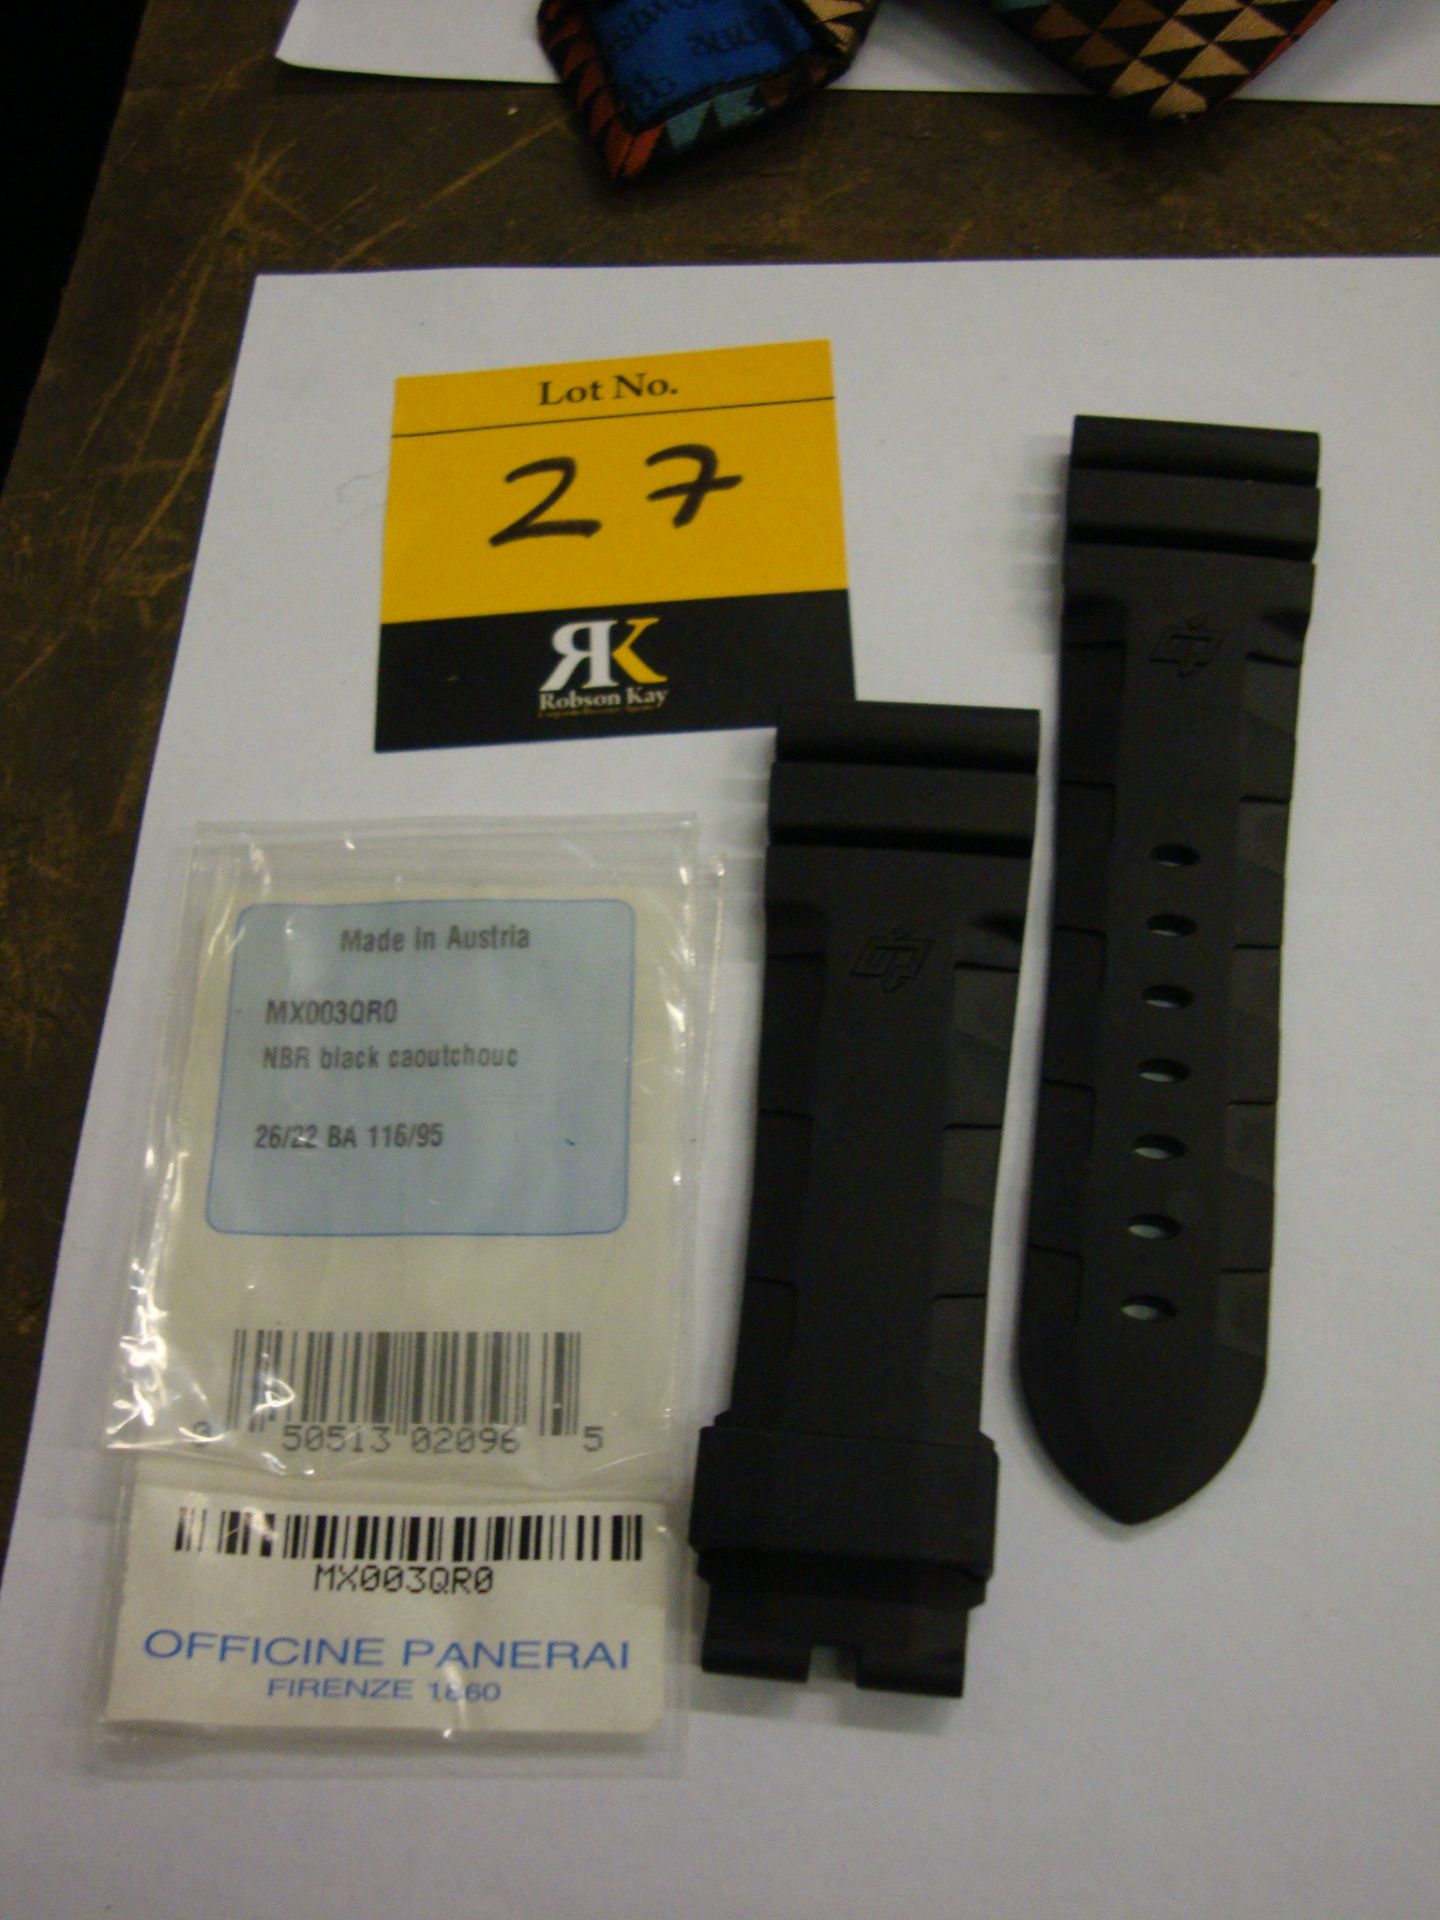 Panerai OEM black rubber strap size 26/22 BA 116/95, code MX003QR0 with original packet and label.